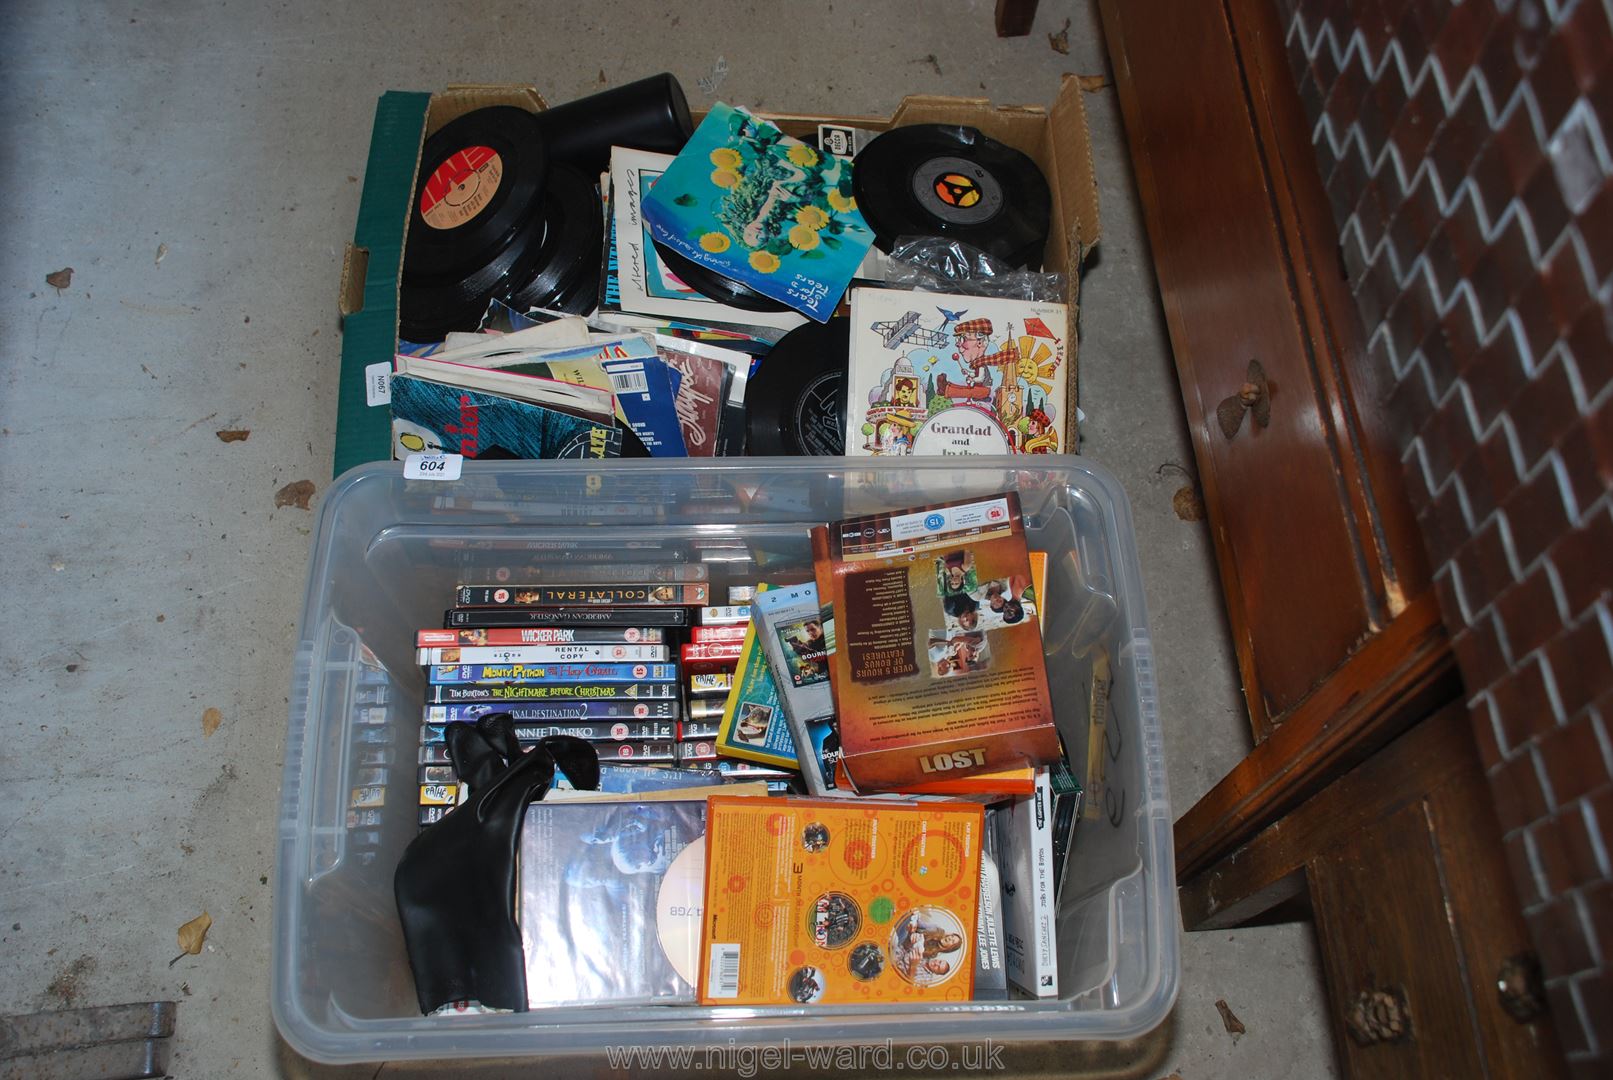 Tub of various DVD's and box of 45 rpm records